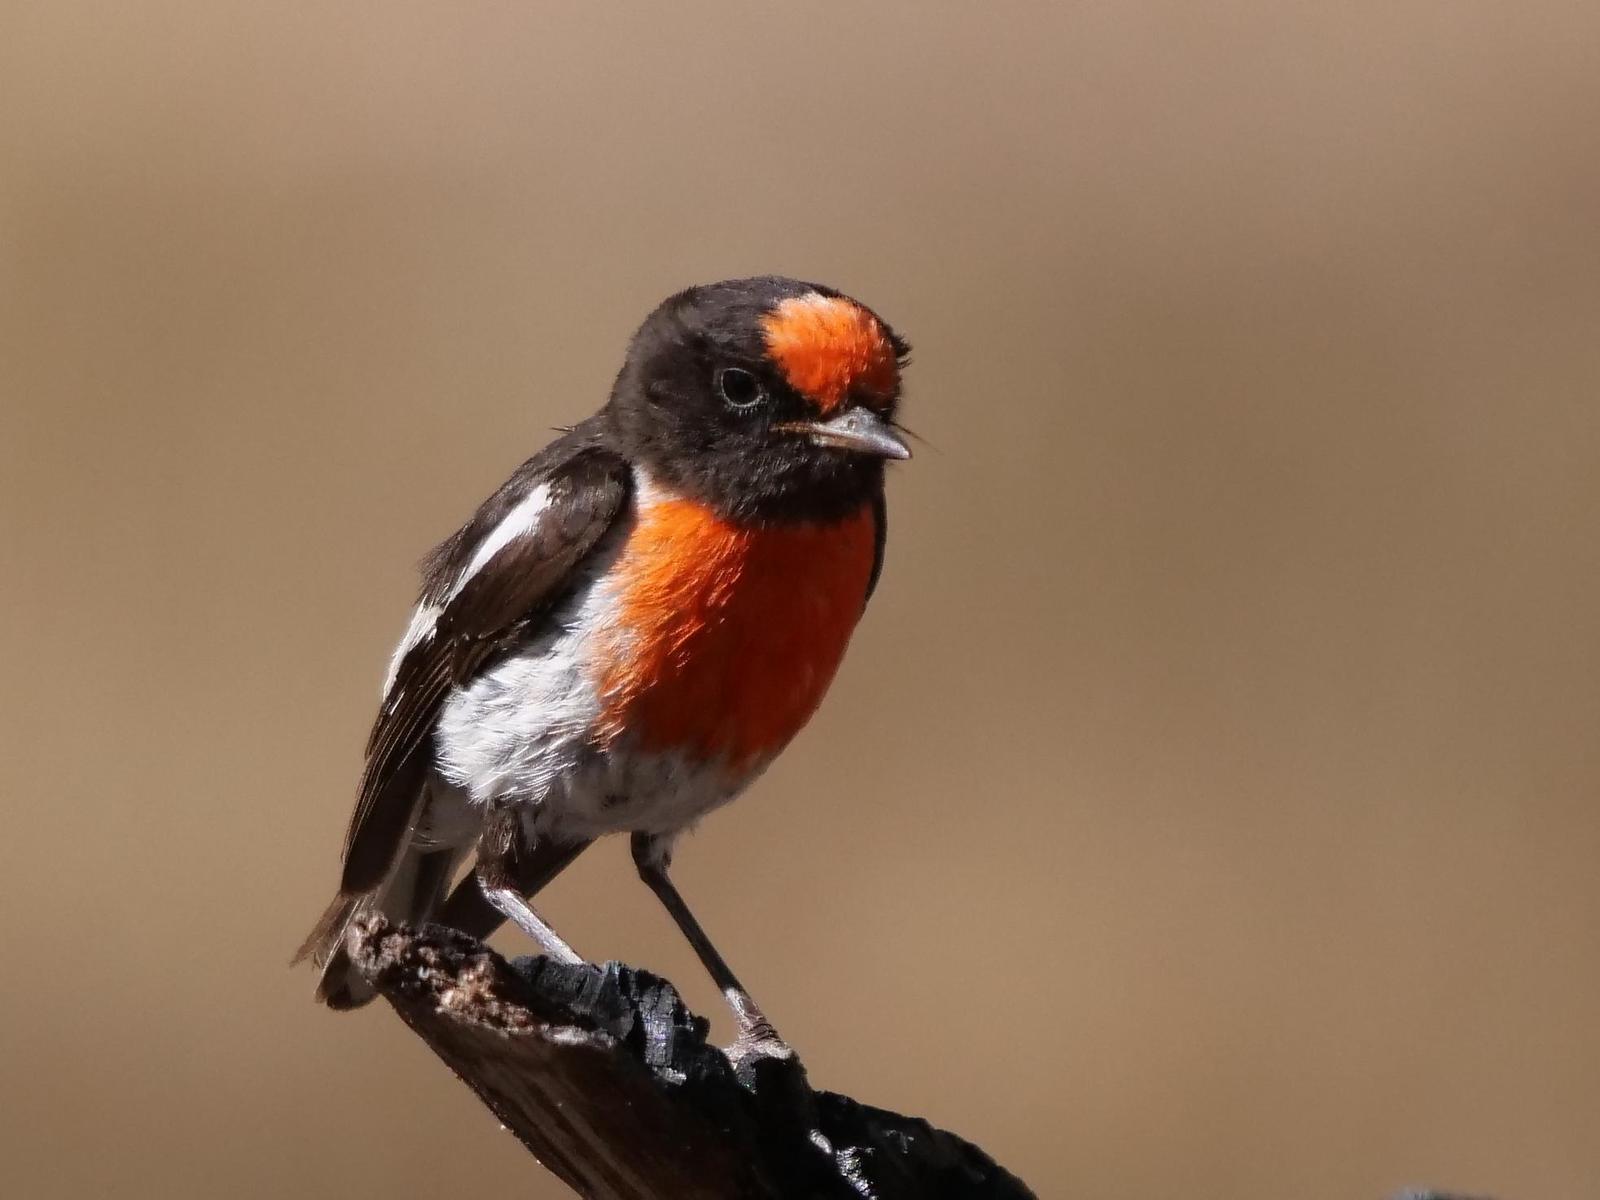 Red-capped Robin Photo by Peter Lowe